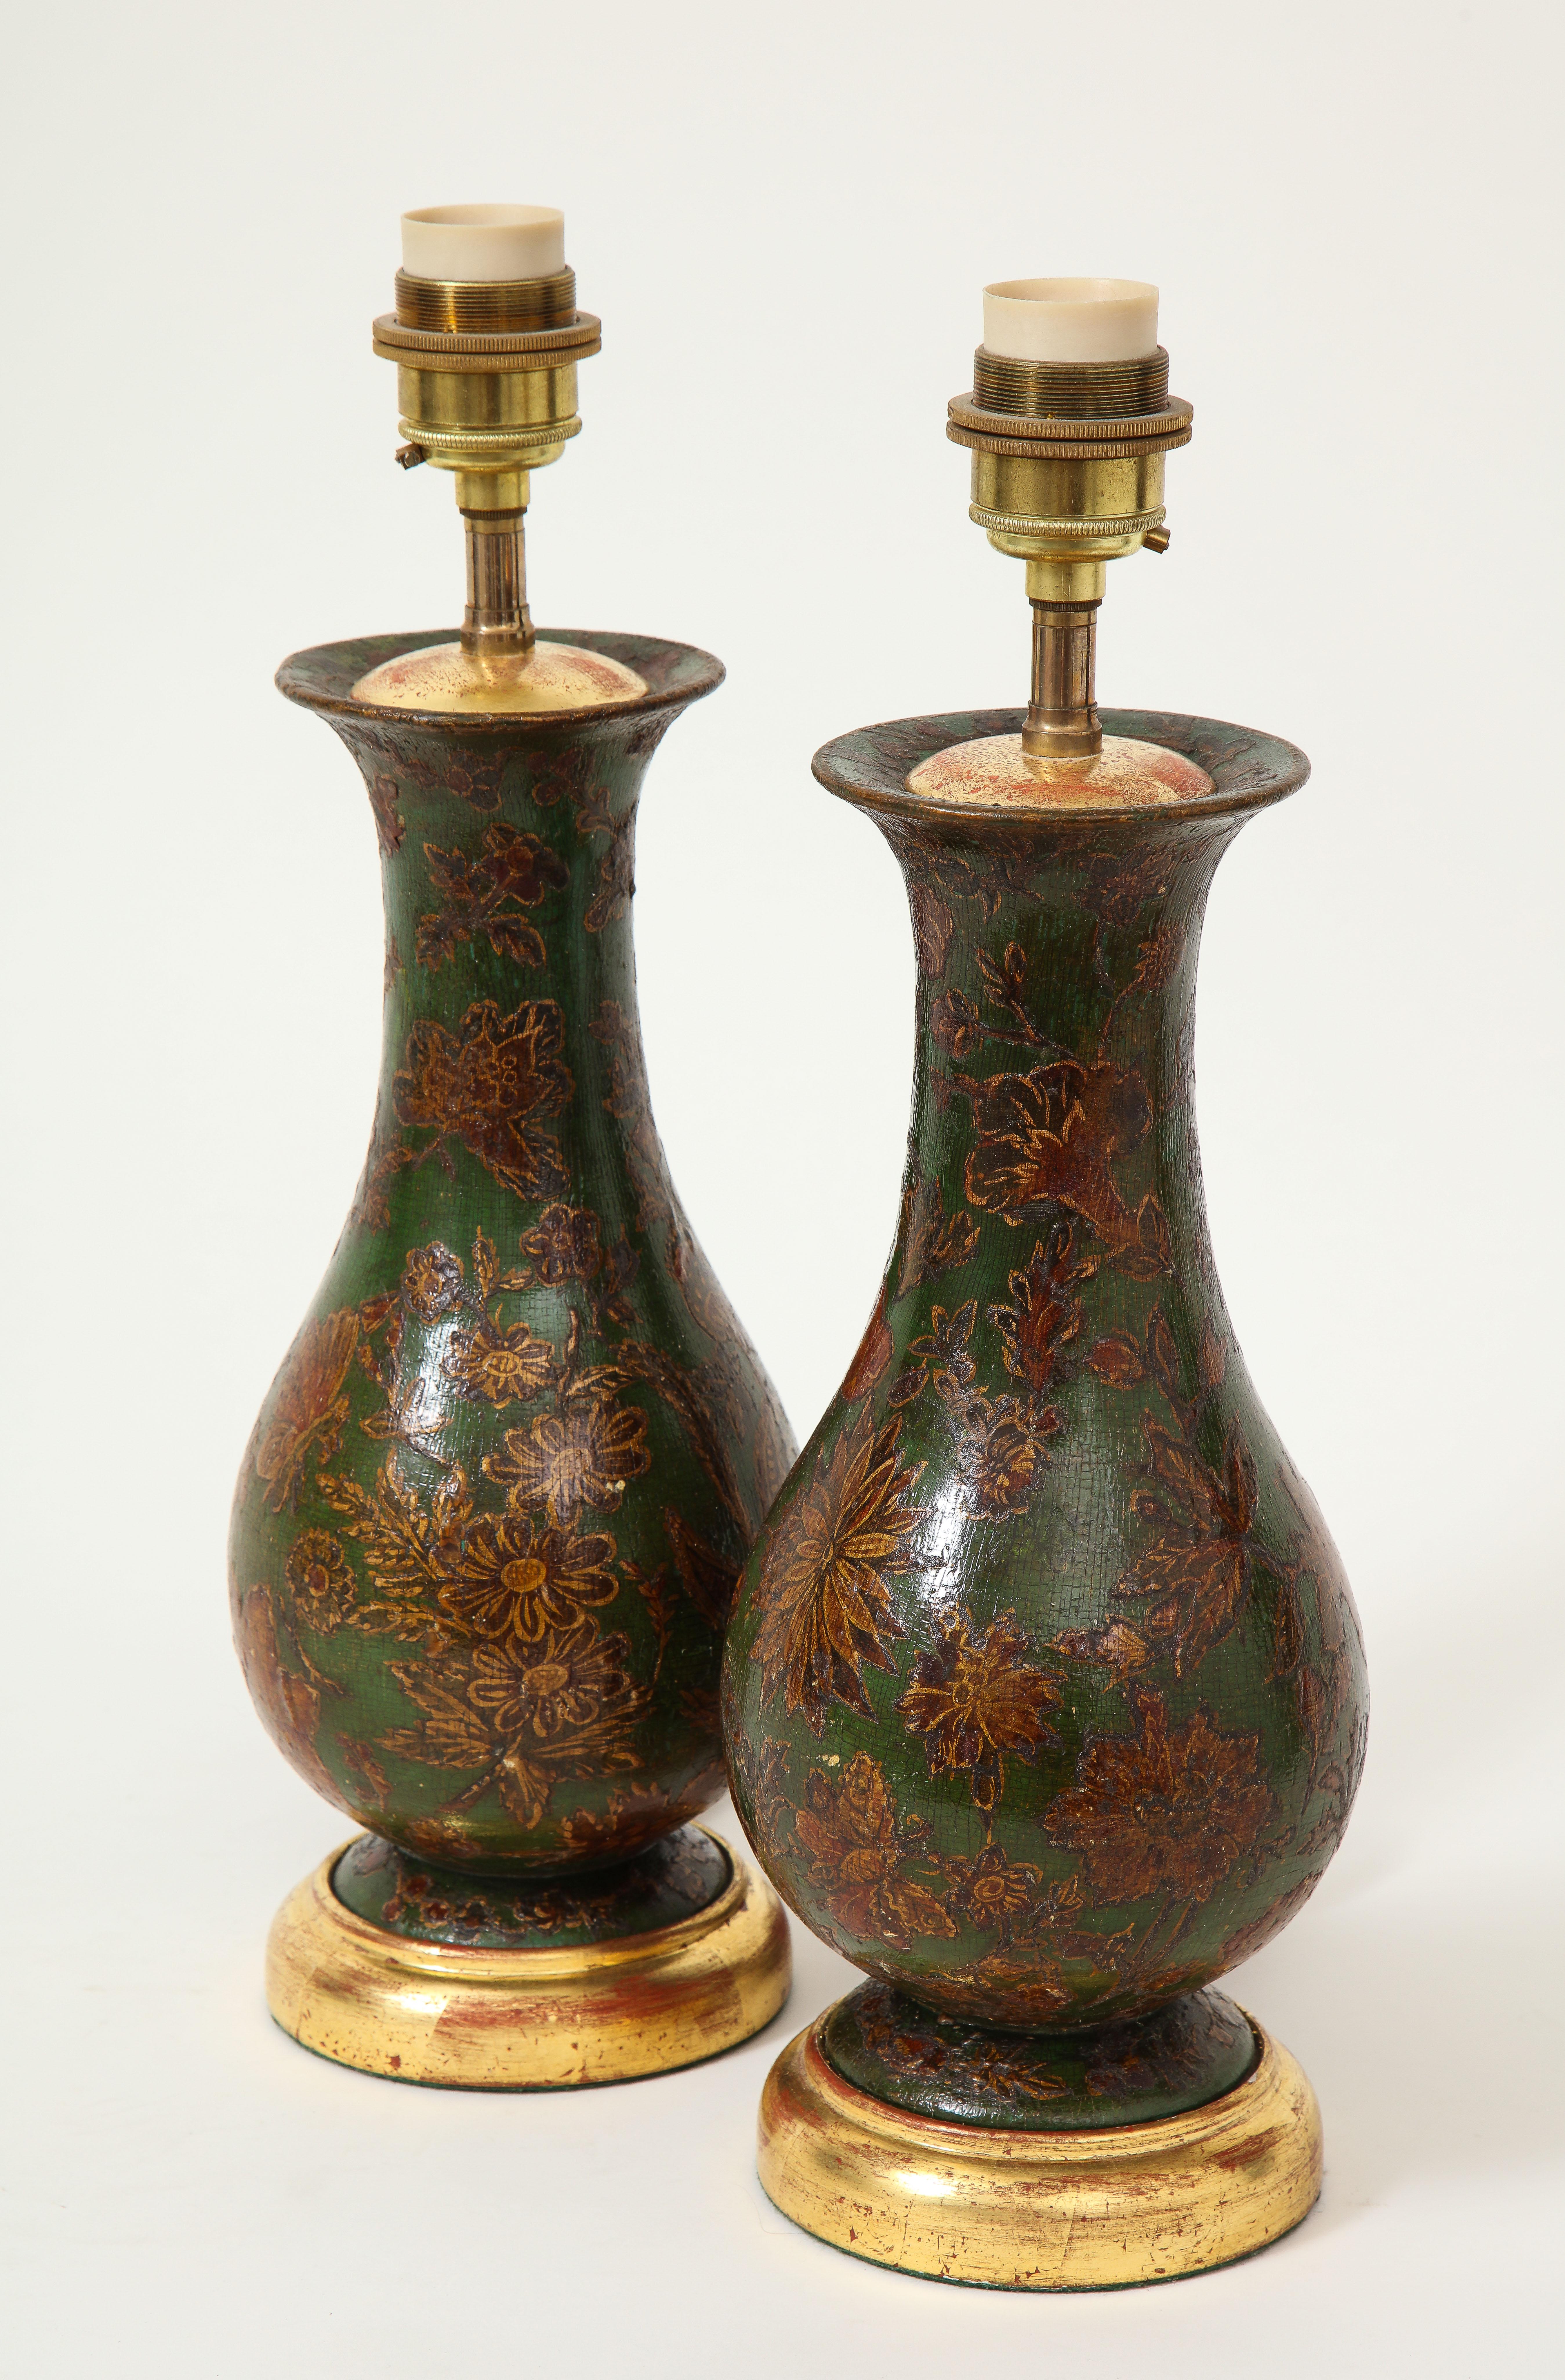 English Pair of George III Green-Painted Decoupaged Wood Vases Mounted as Lamps